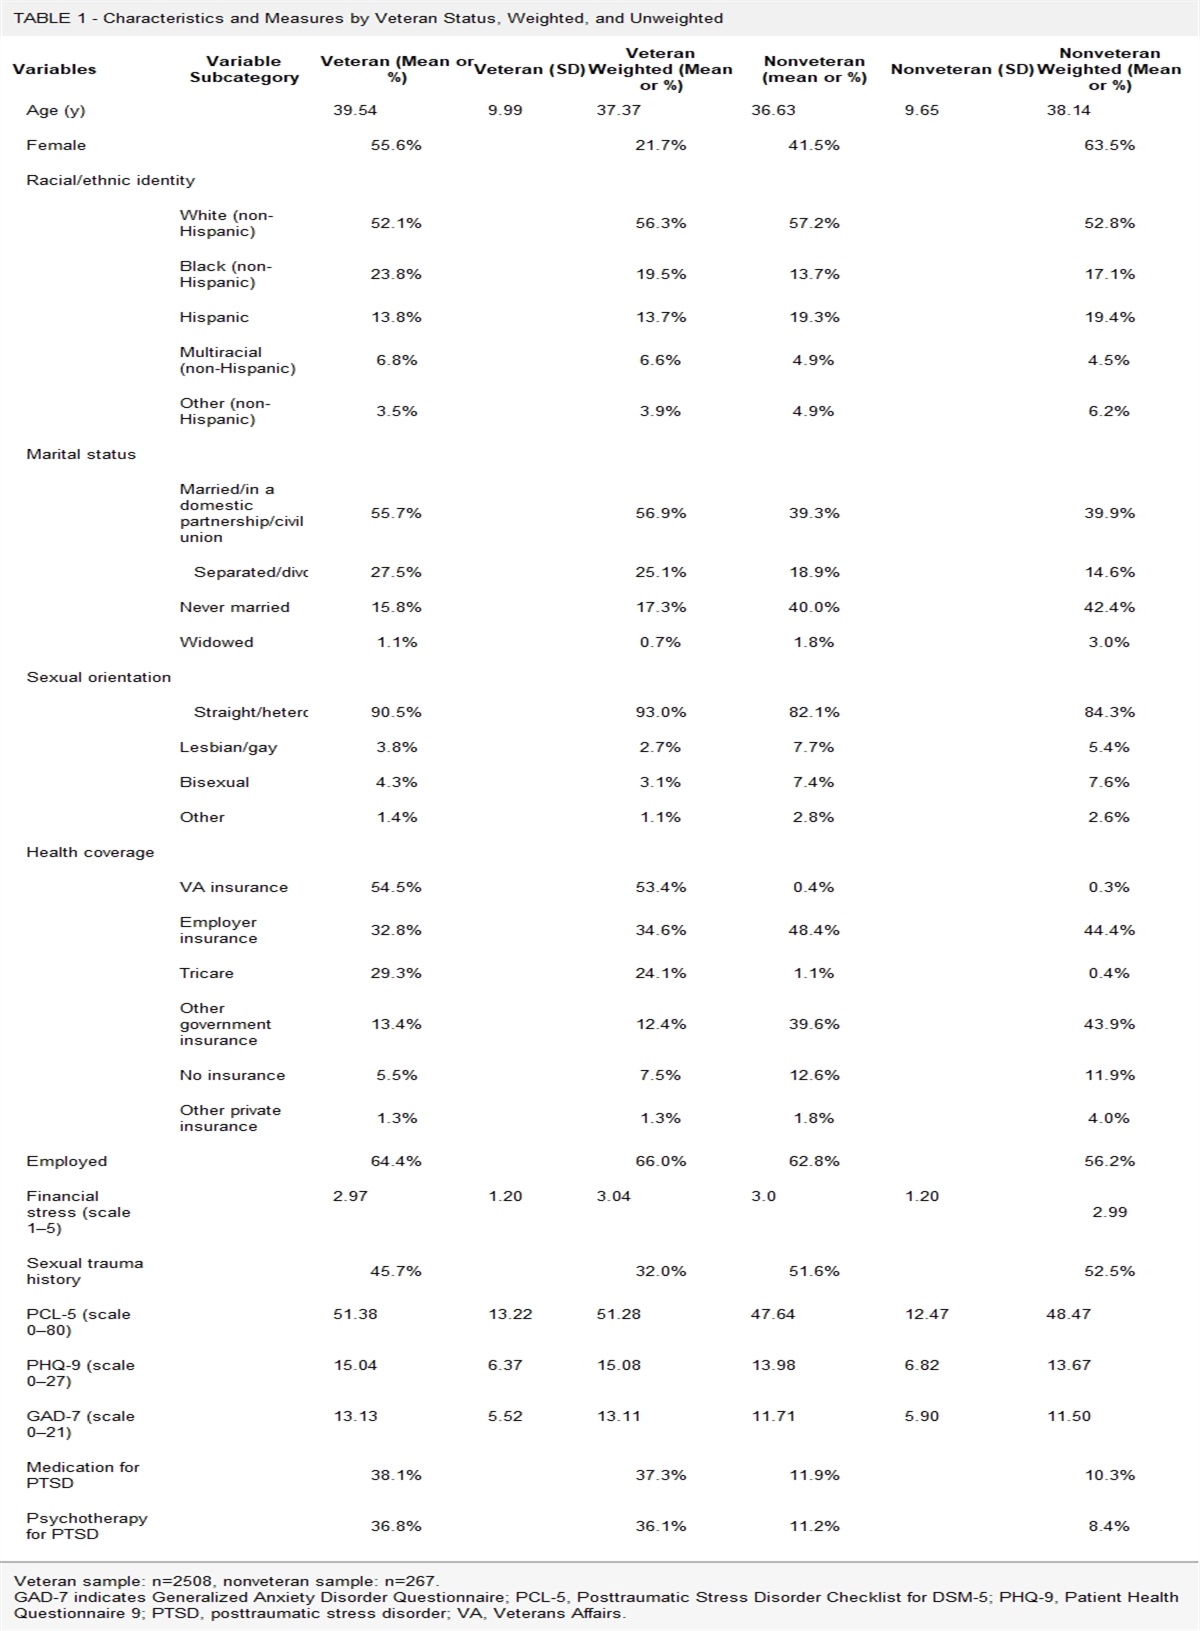 Treatment Utilization for Posttraumatic Stress Disorder in a National Sample of Veterans and Nonveterans